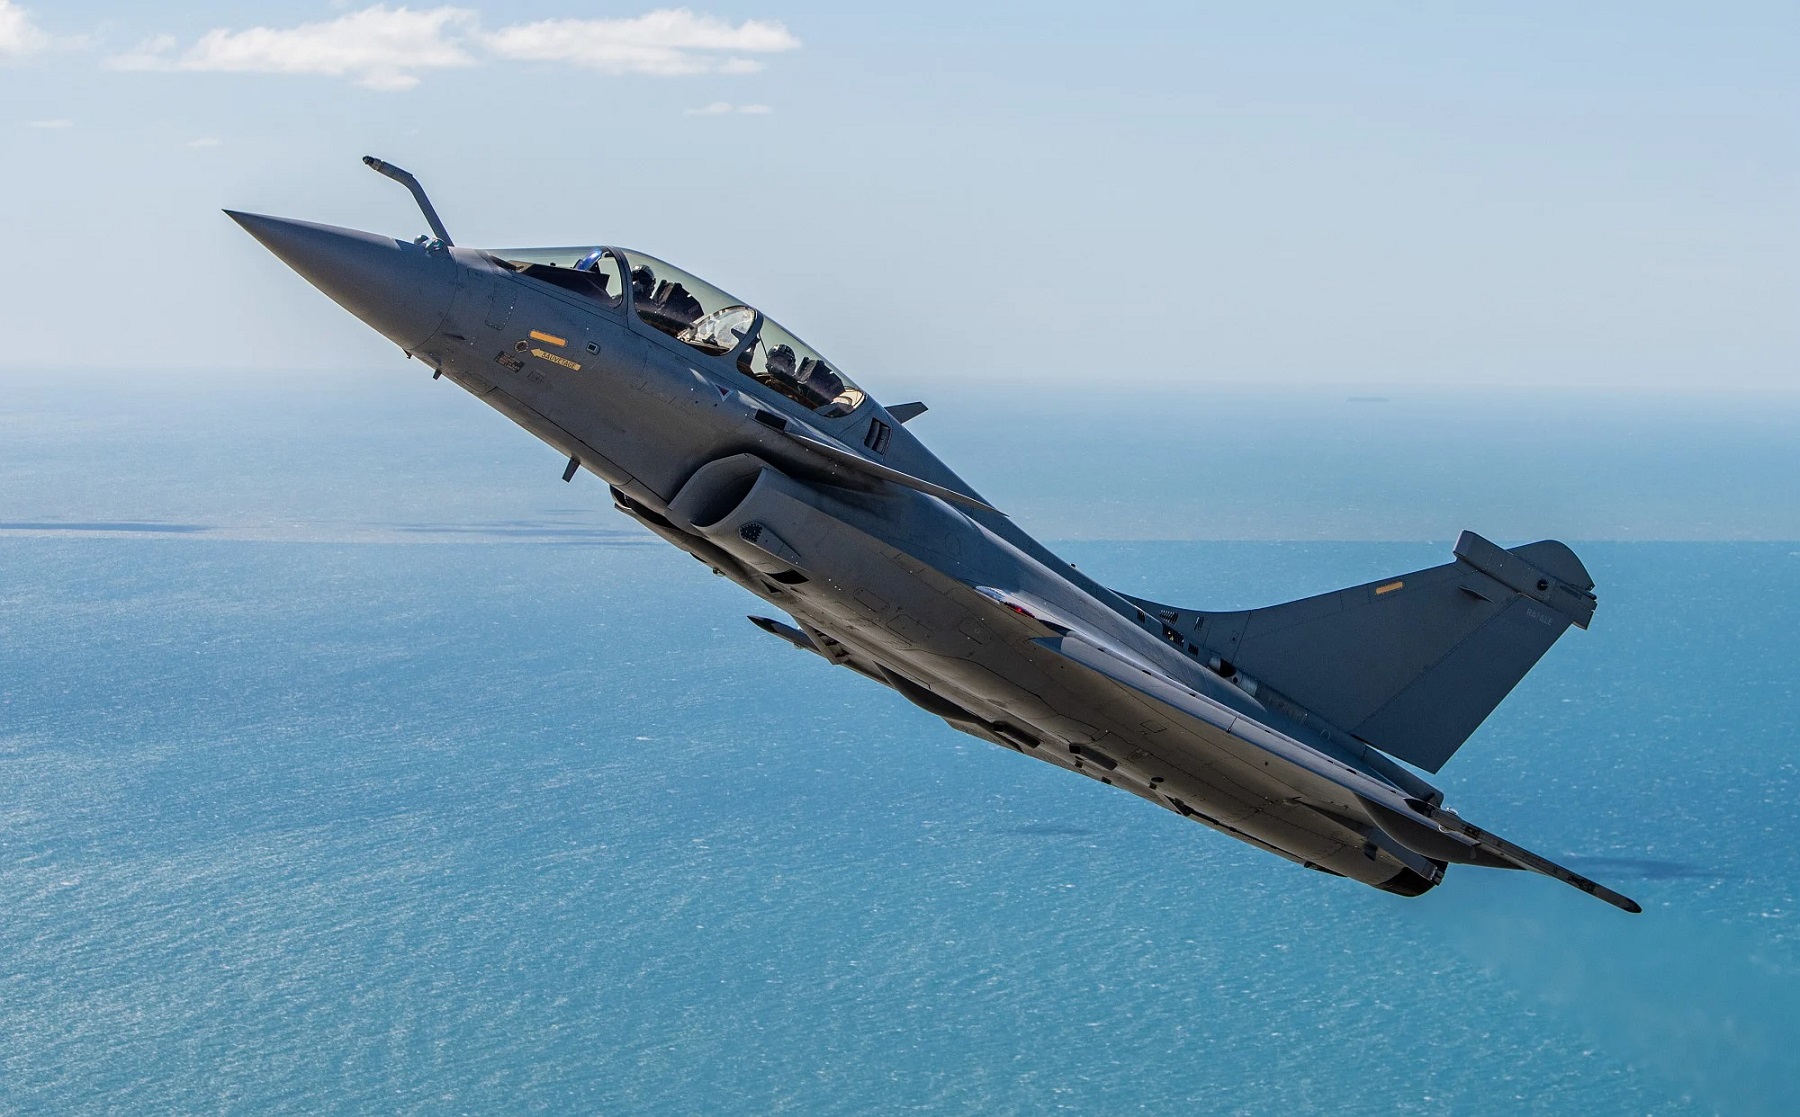 Croatia and France Finalize Dassault Rafale Multirole Fighter Aircrafts Acquisition